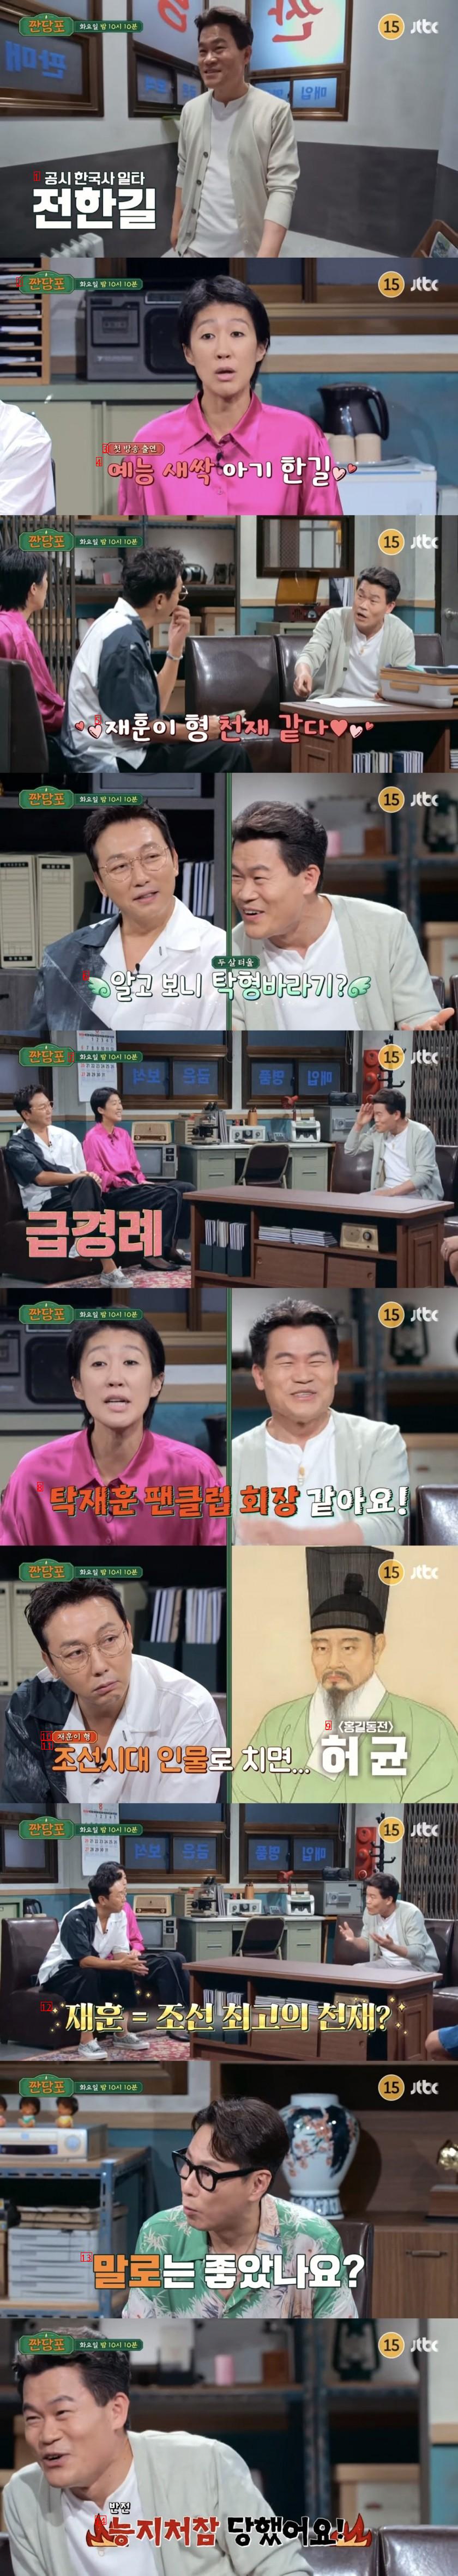 Jeon Ha-gil appeared on the first show of his life